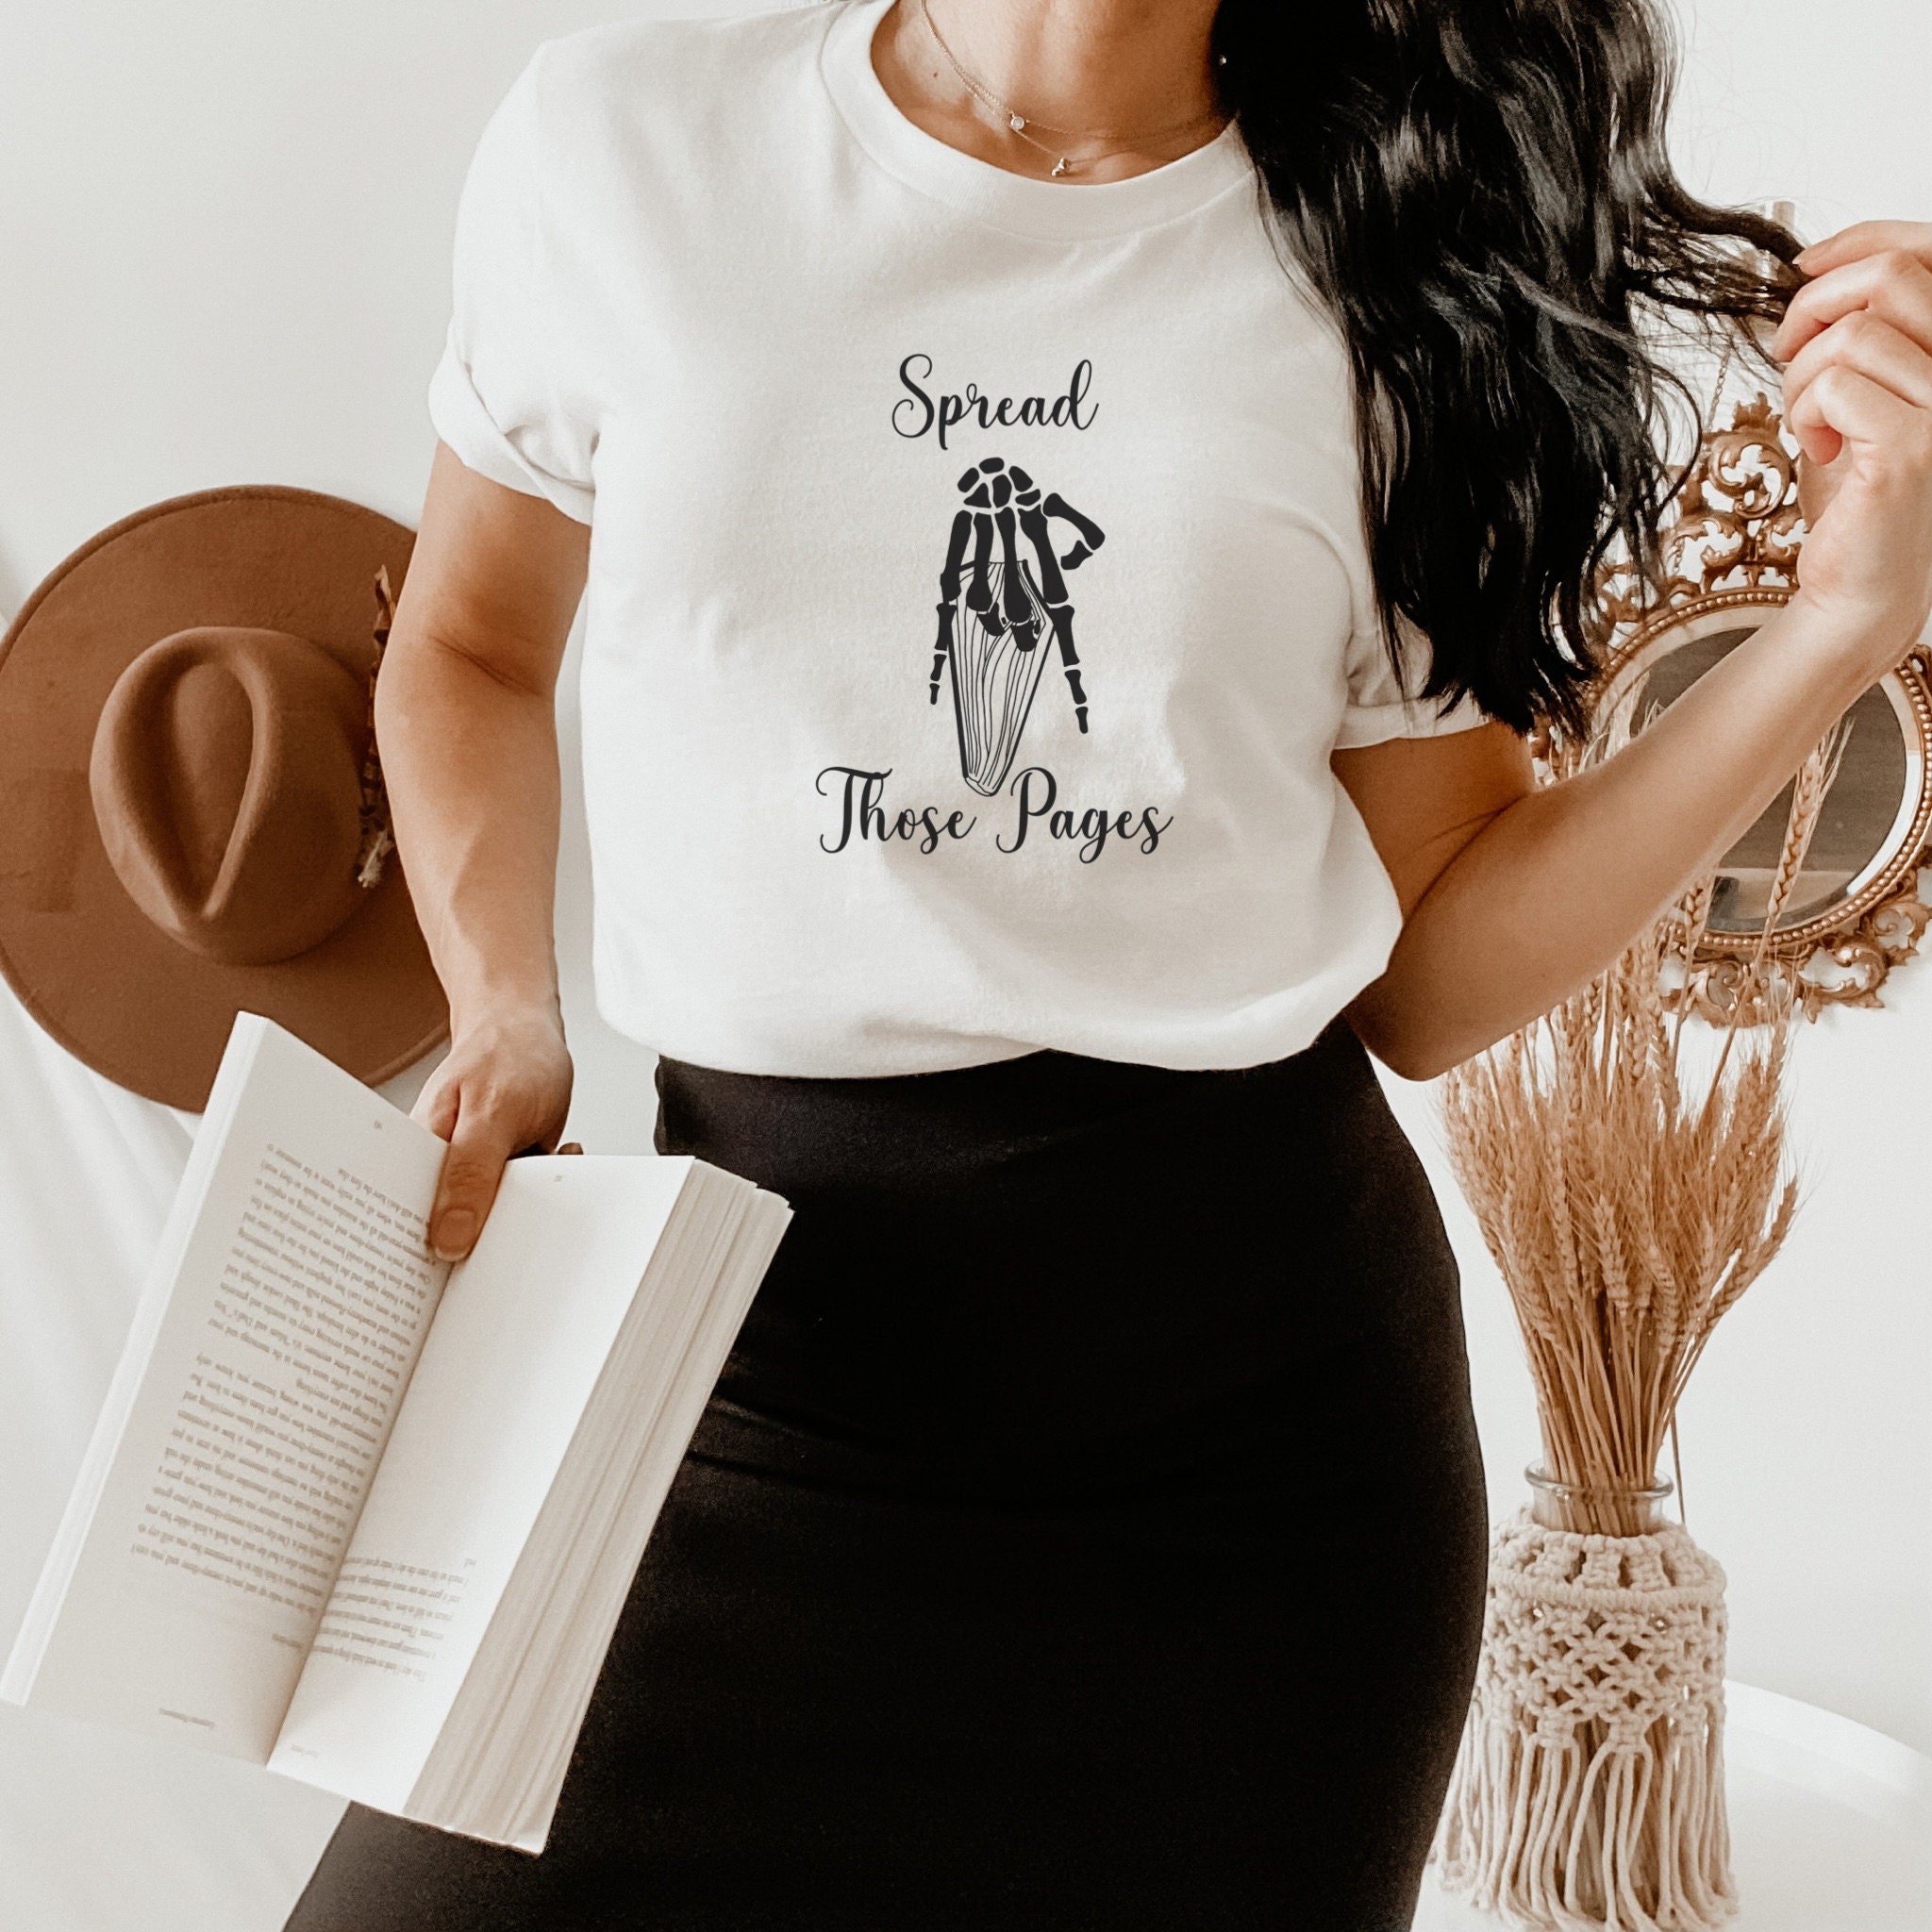 Konsultere Havn dollar Spread Those Pages Shirt Spicy Books T Shirt Smut Reader - Etsy